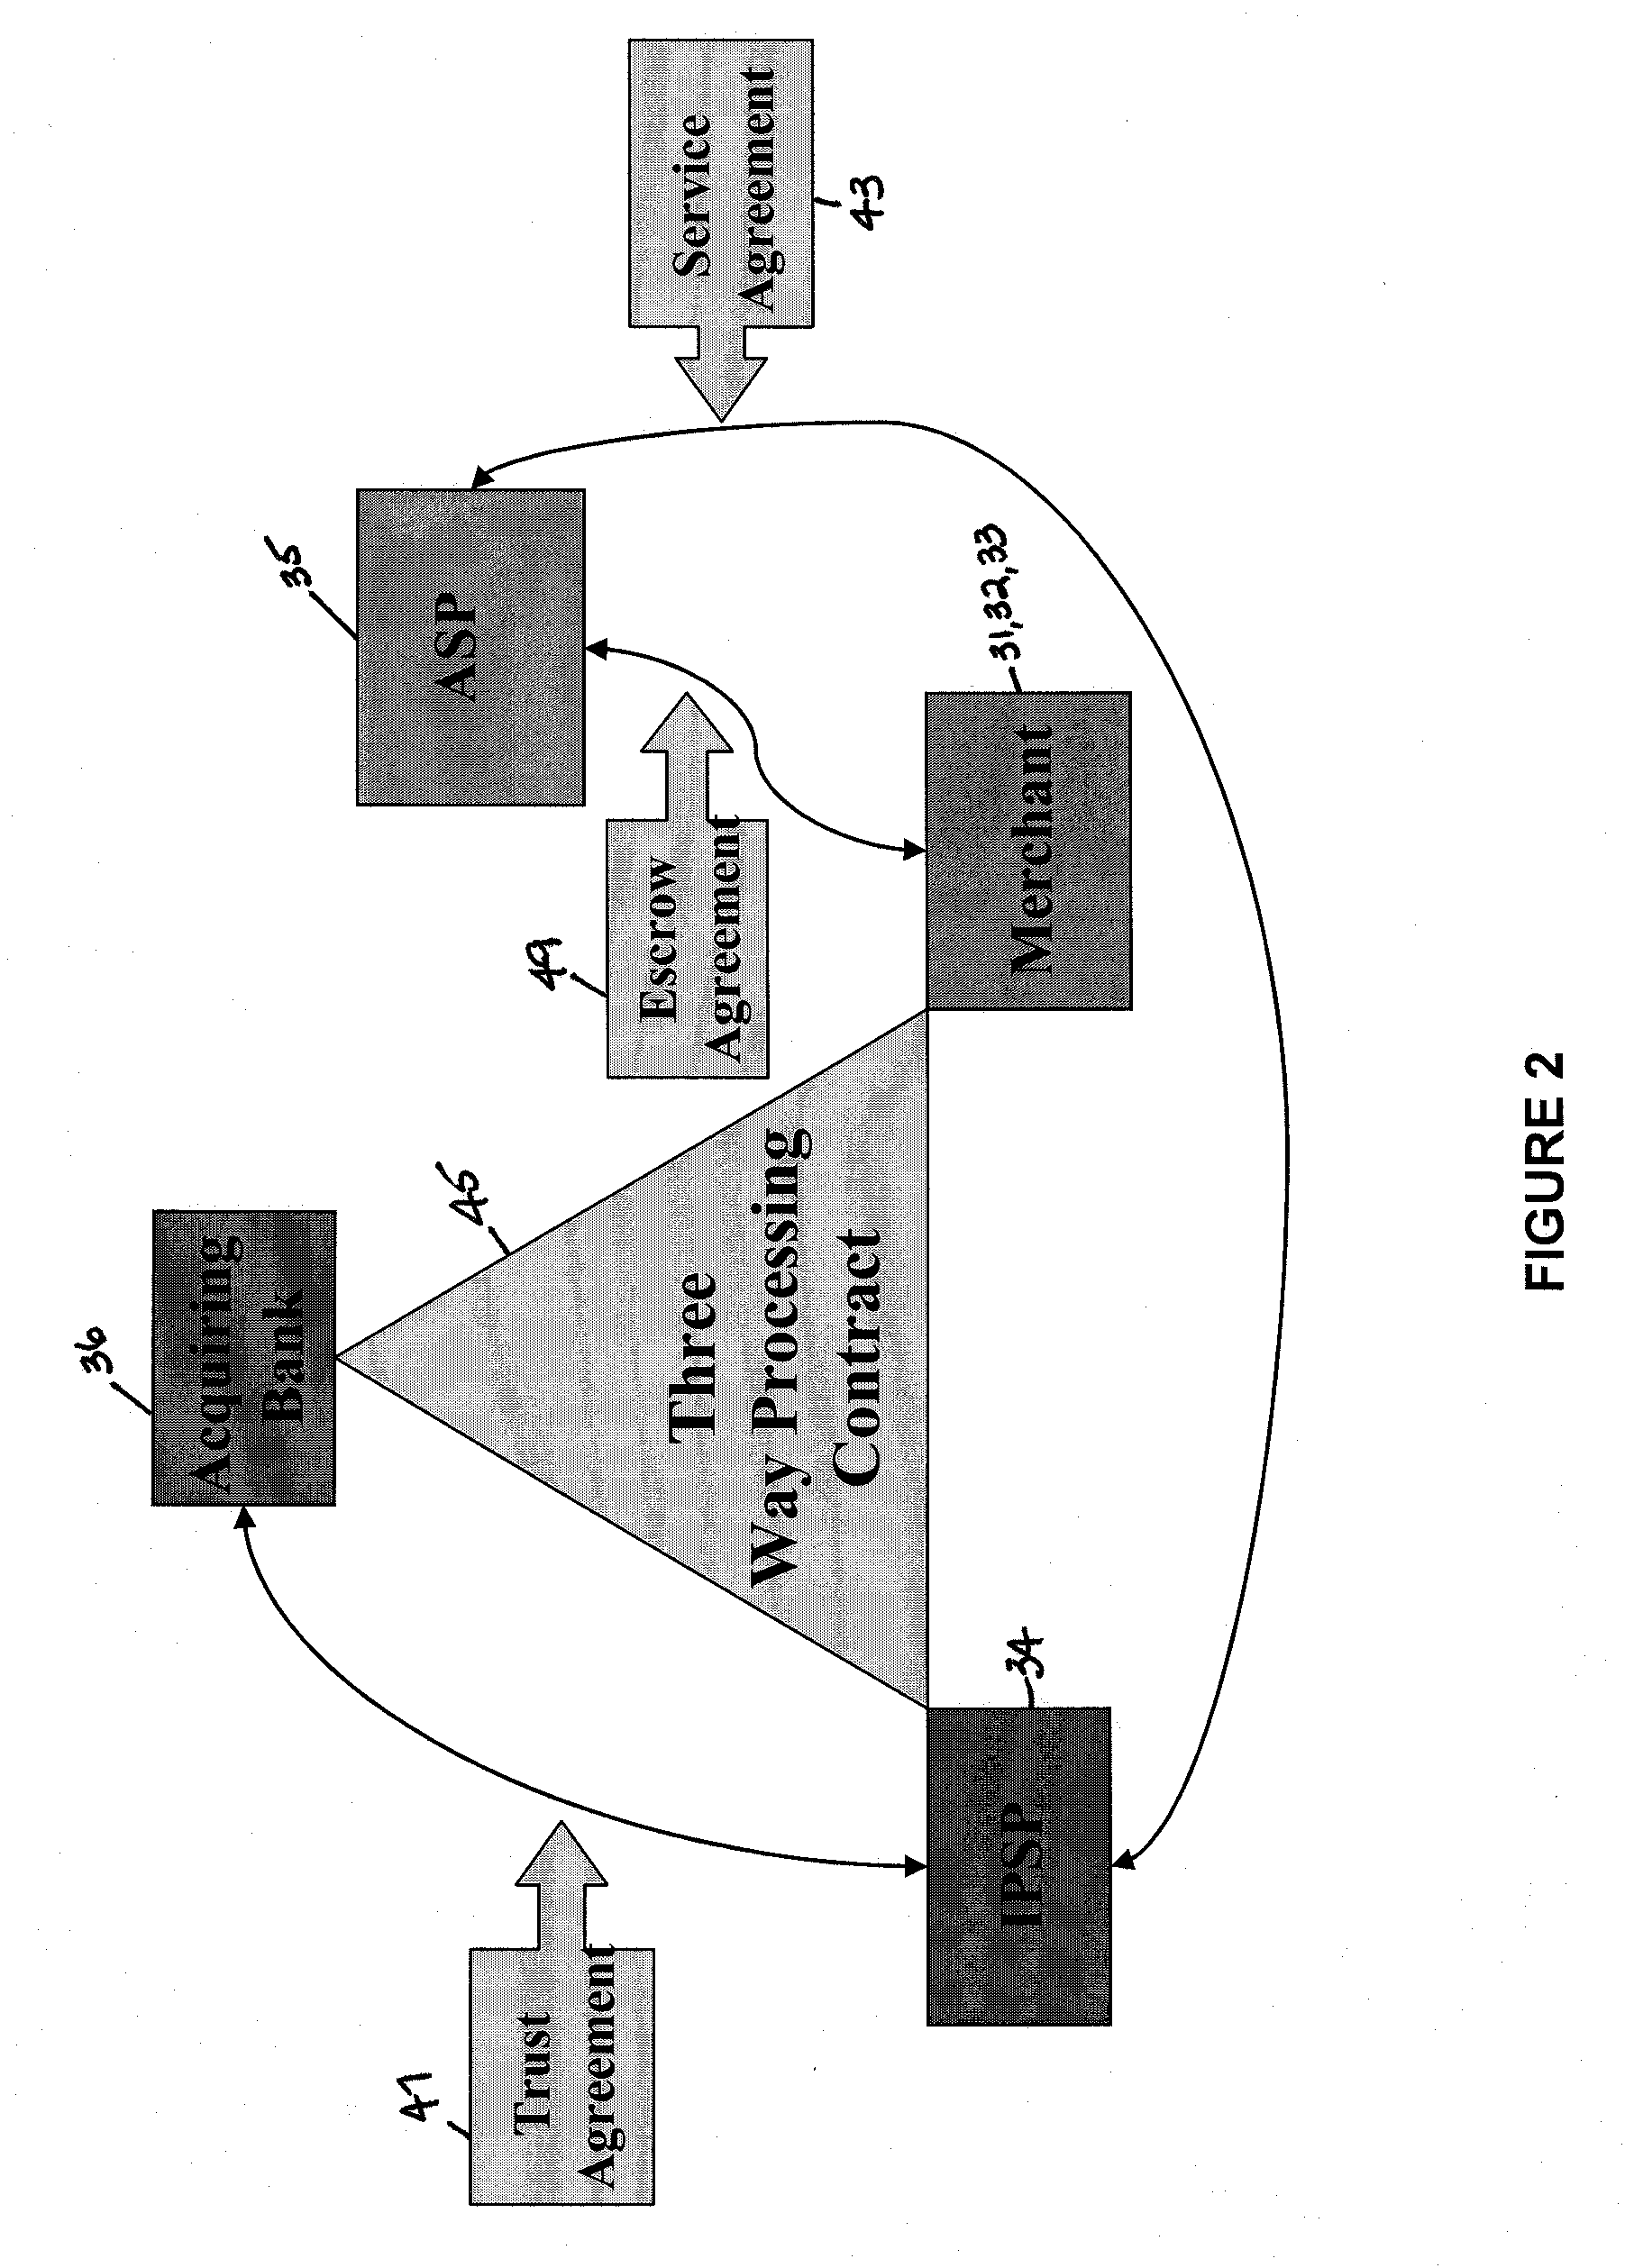 Systems and methods for determining regulations governing financial transactions conducted over a network